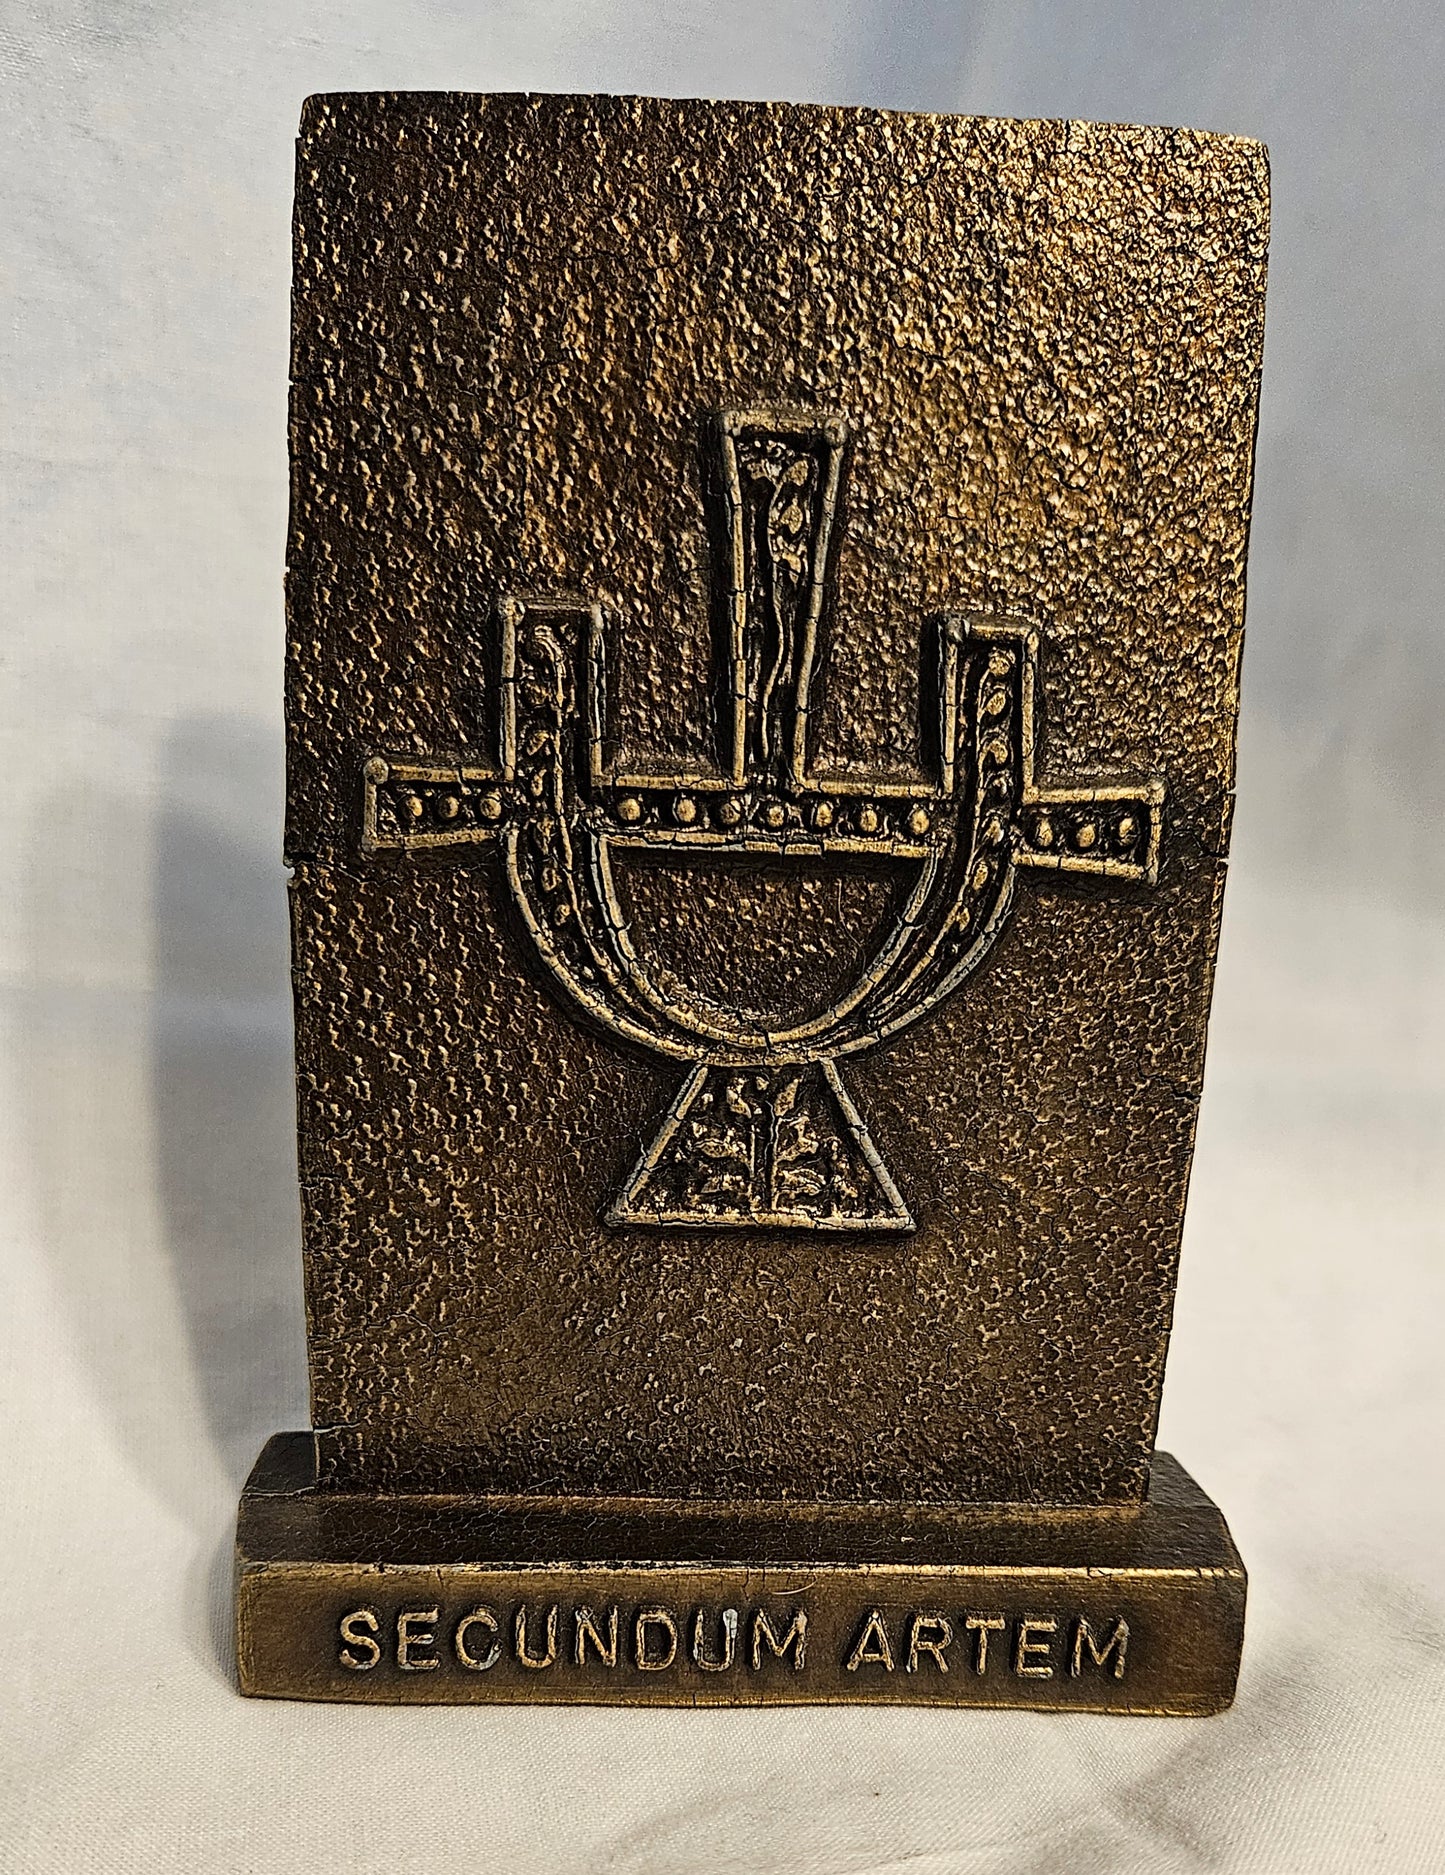 apothecary medical brass paperweight with vinegar symbol on it and "secundum artem" front view